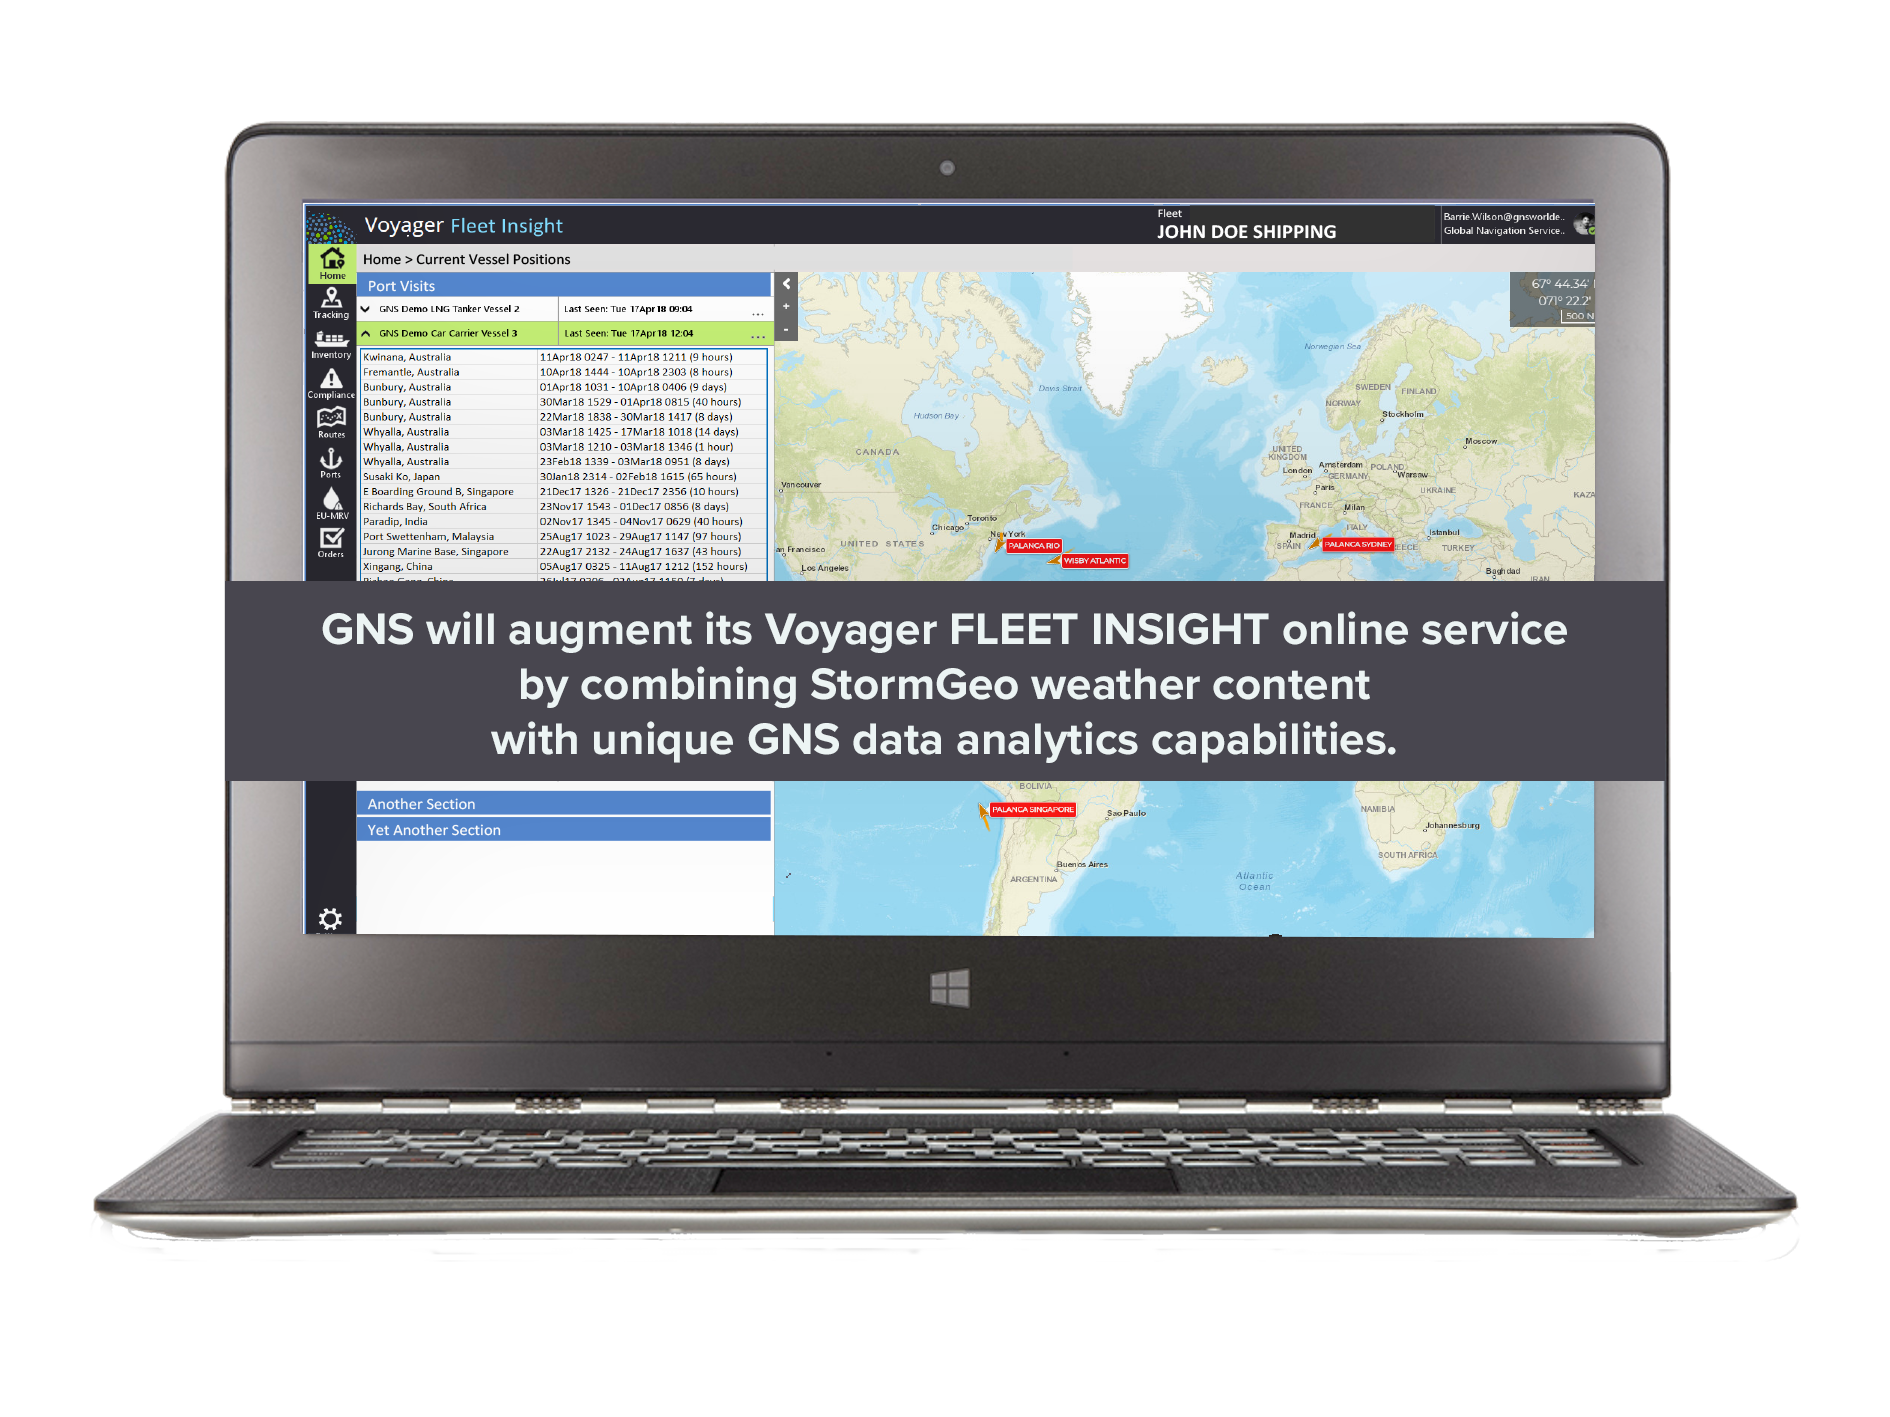 GNS and StormGeo announce new strategic partnership to bring together world-leading navigation and weather solutions